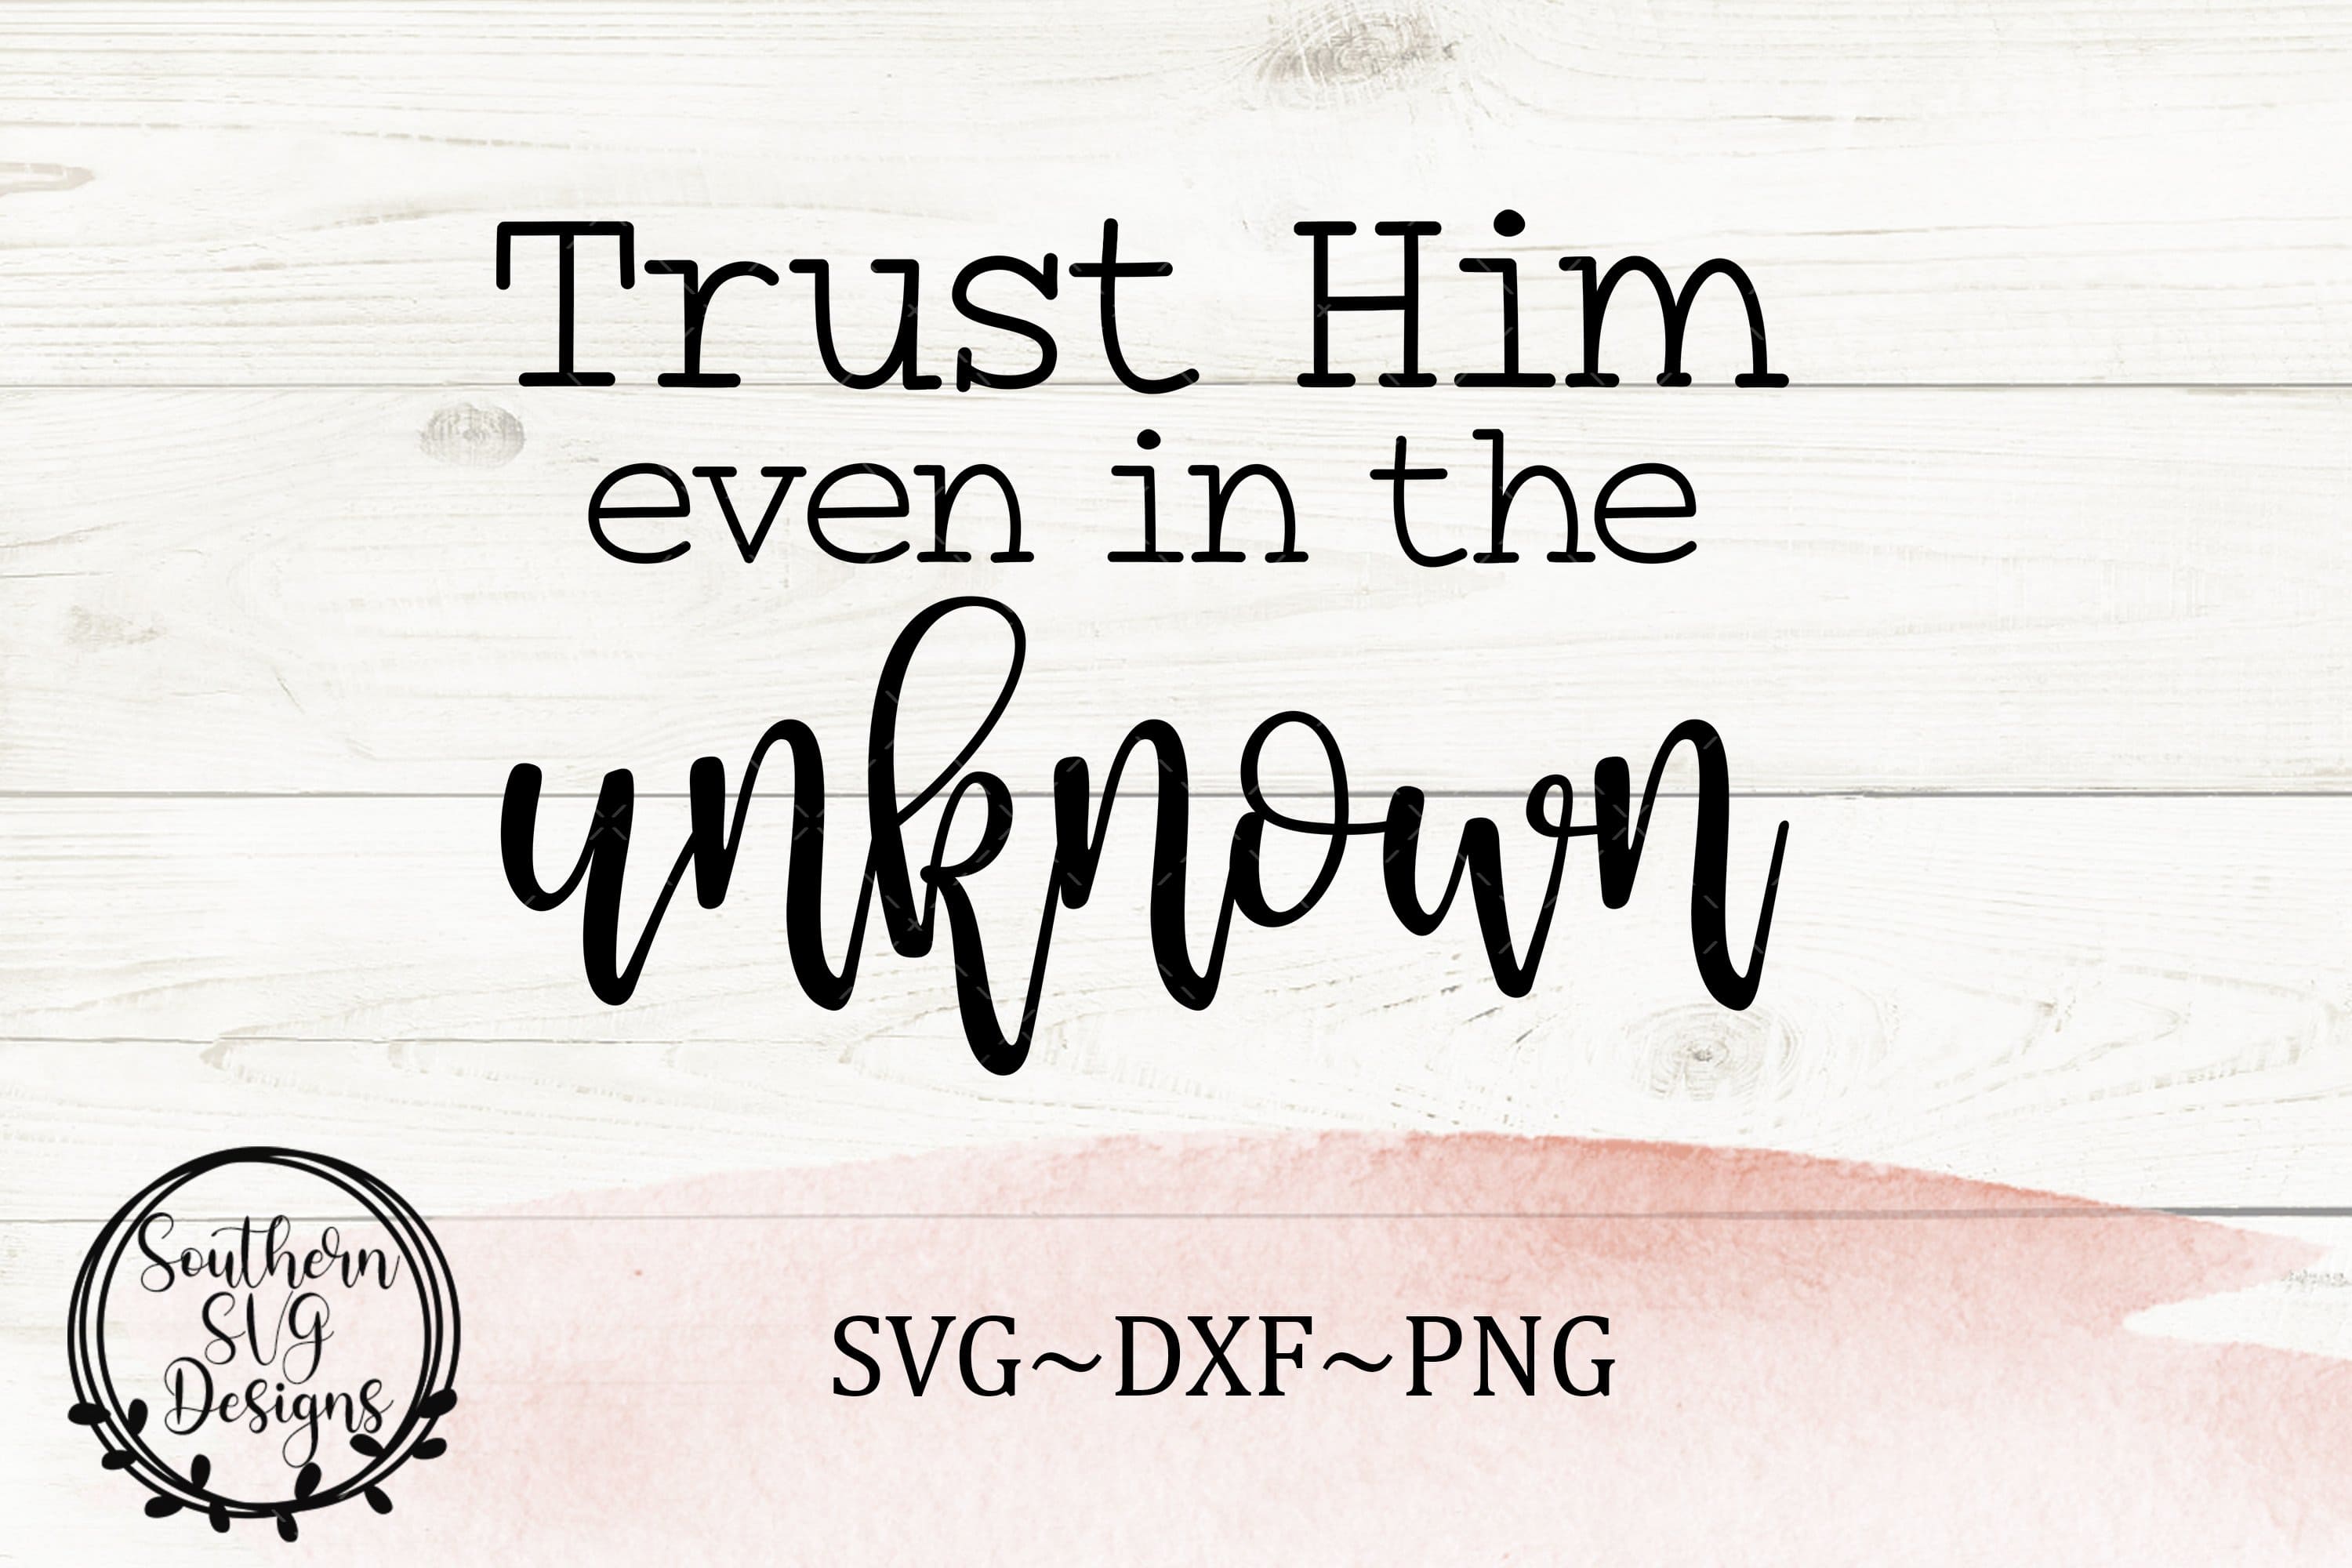 trust him even in the unknown IN SVG, DXF, PNG.